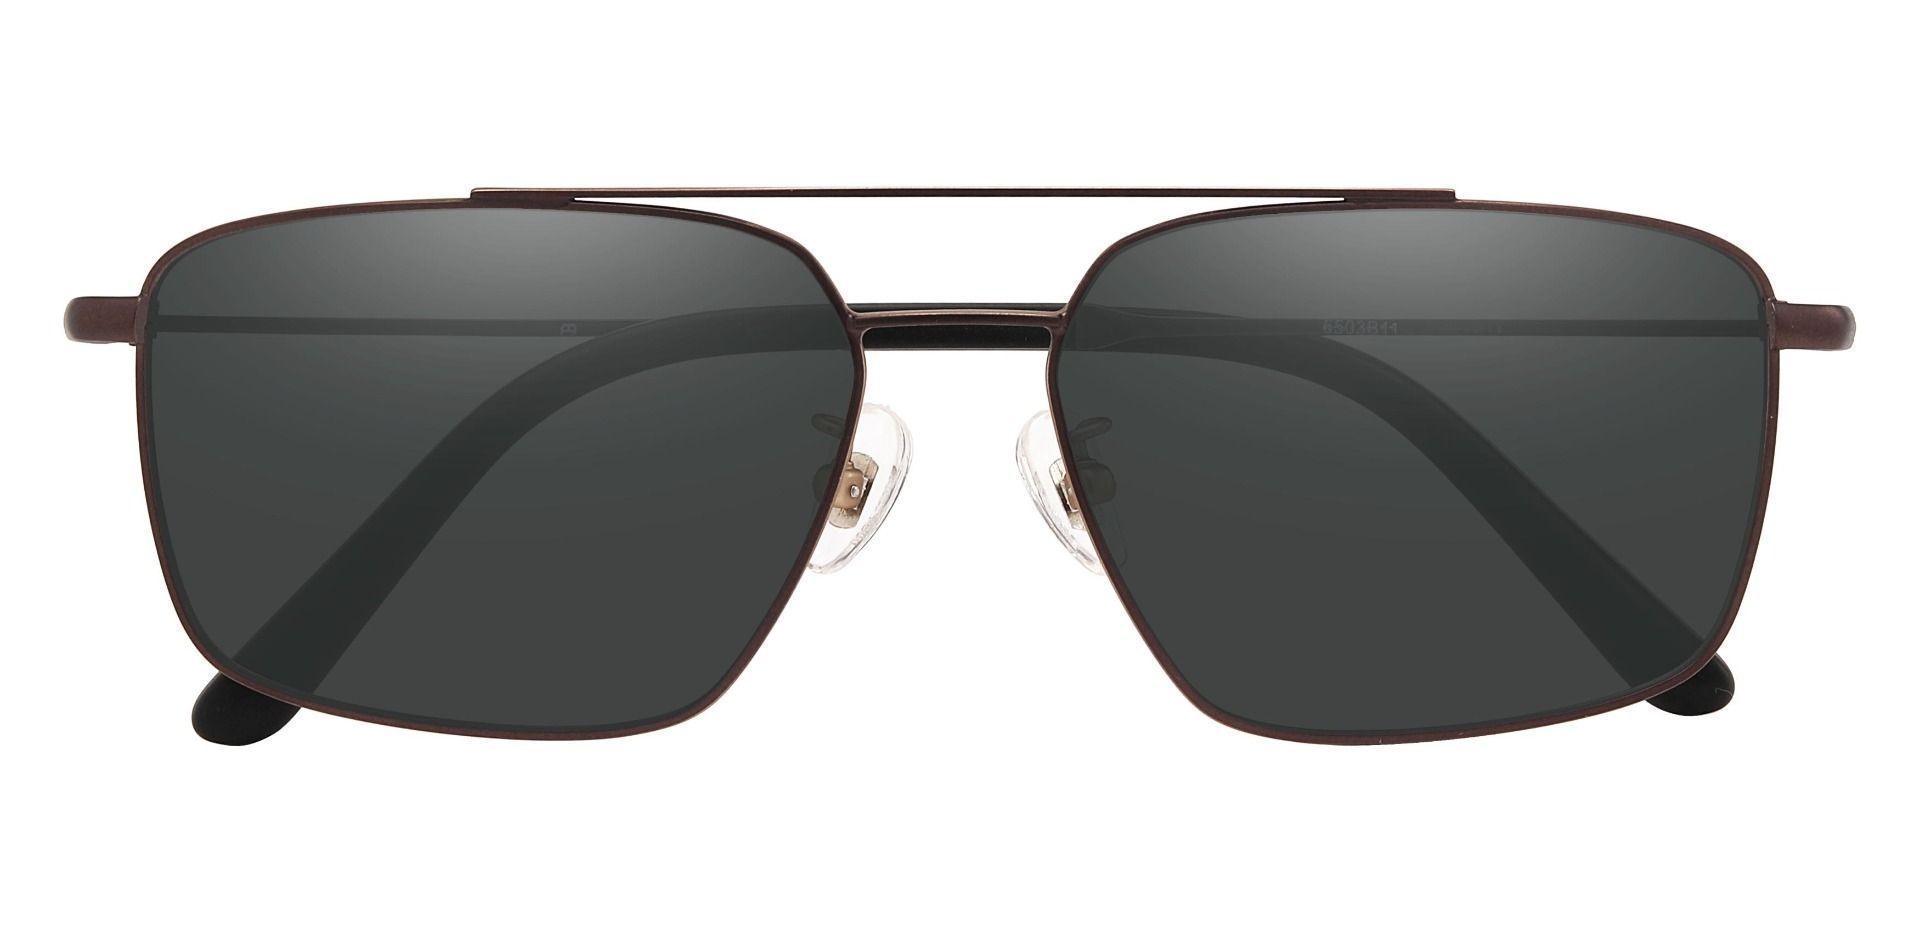 Barlow Aviator Reading Sunglasses - Brown Frame With Gray Lenses